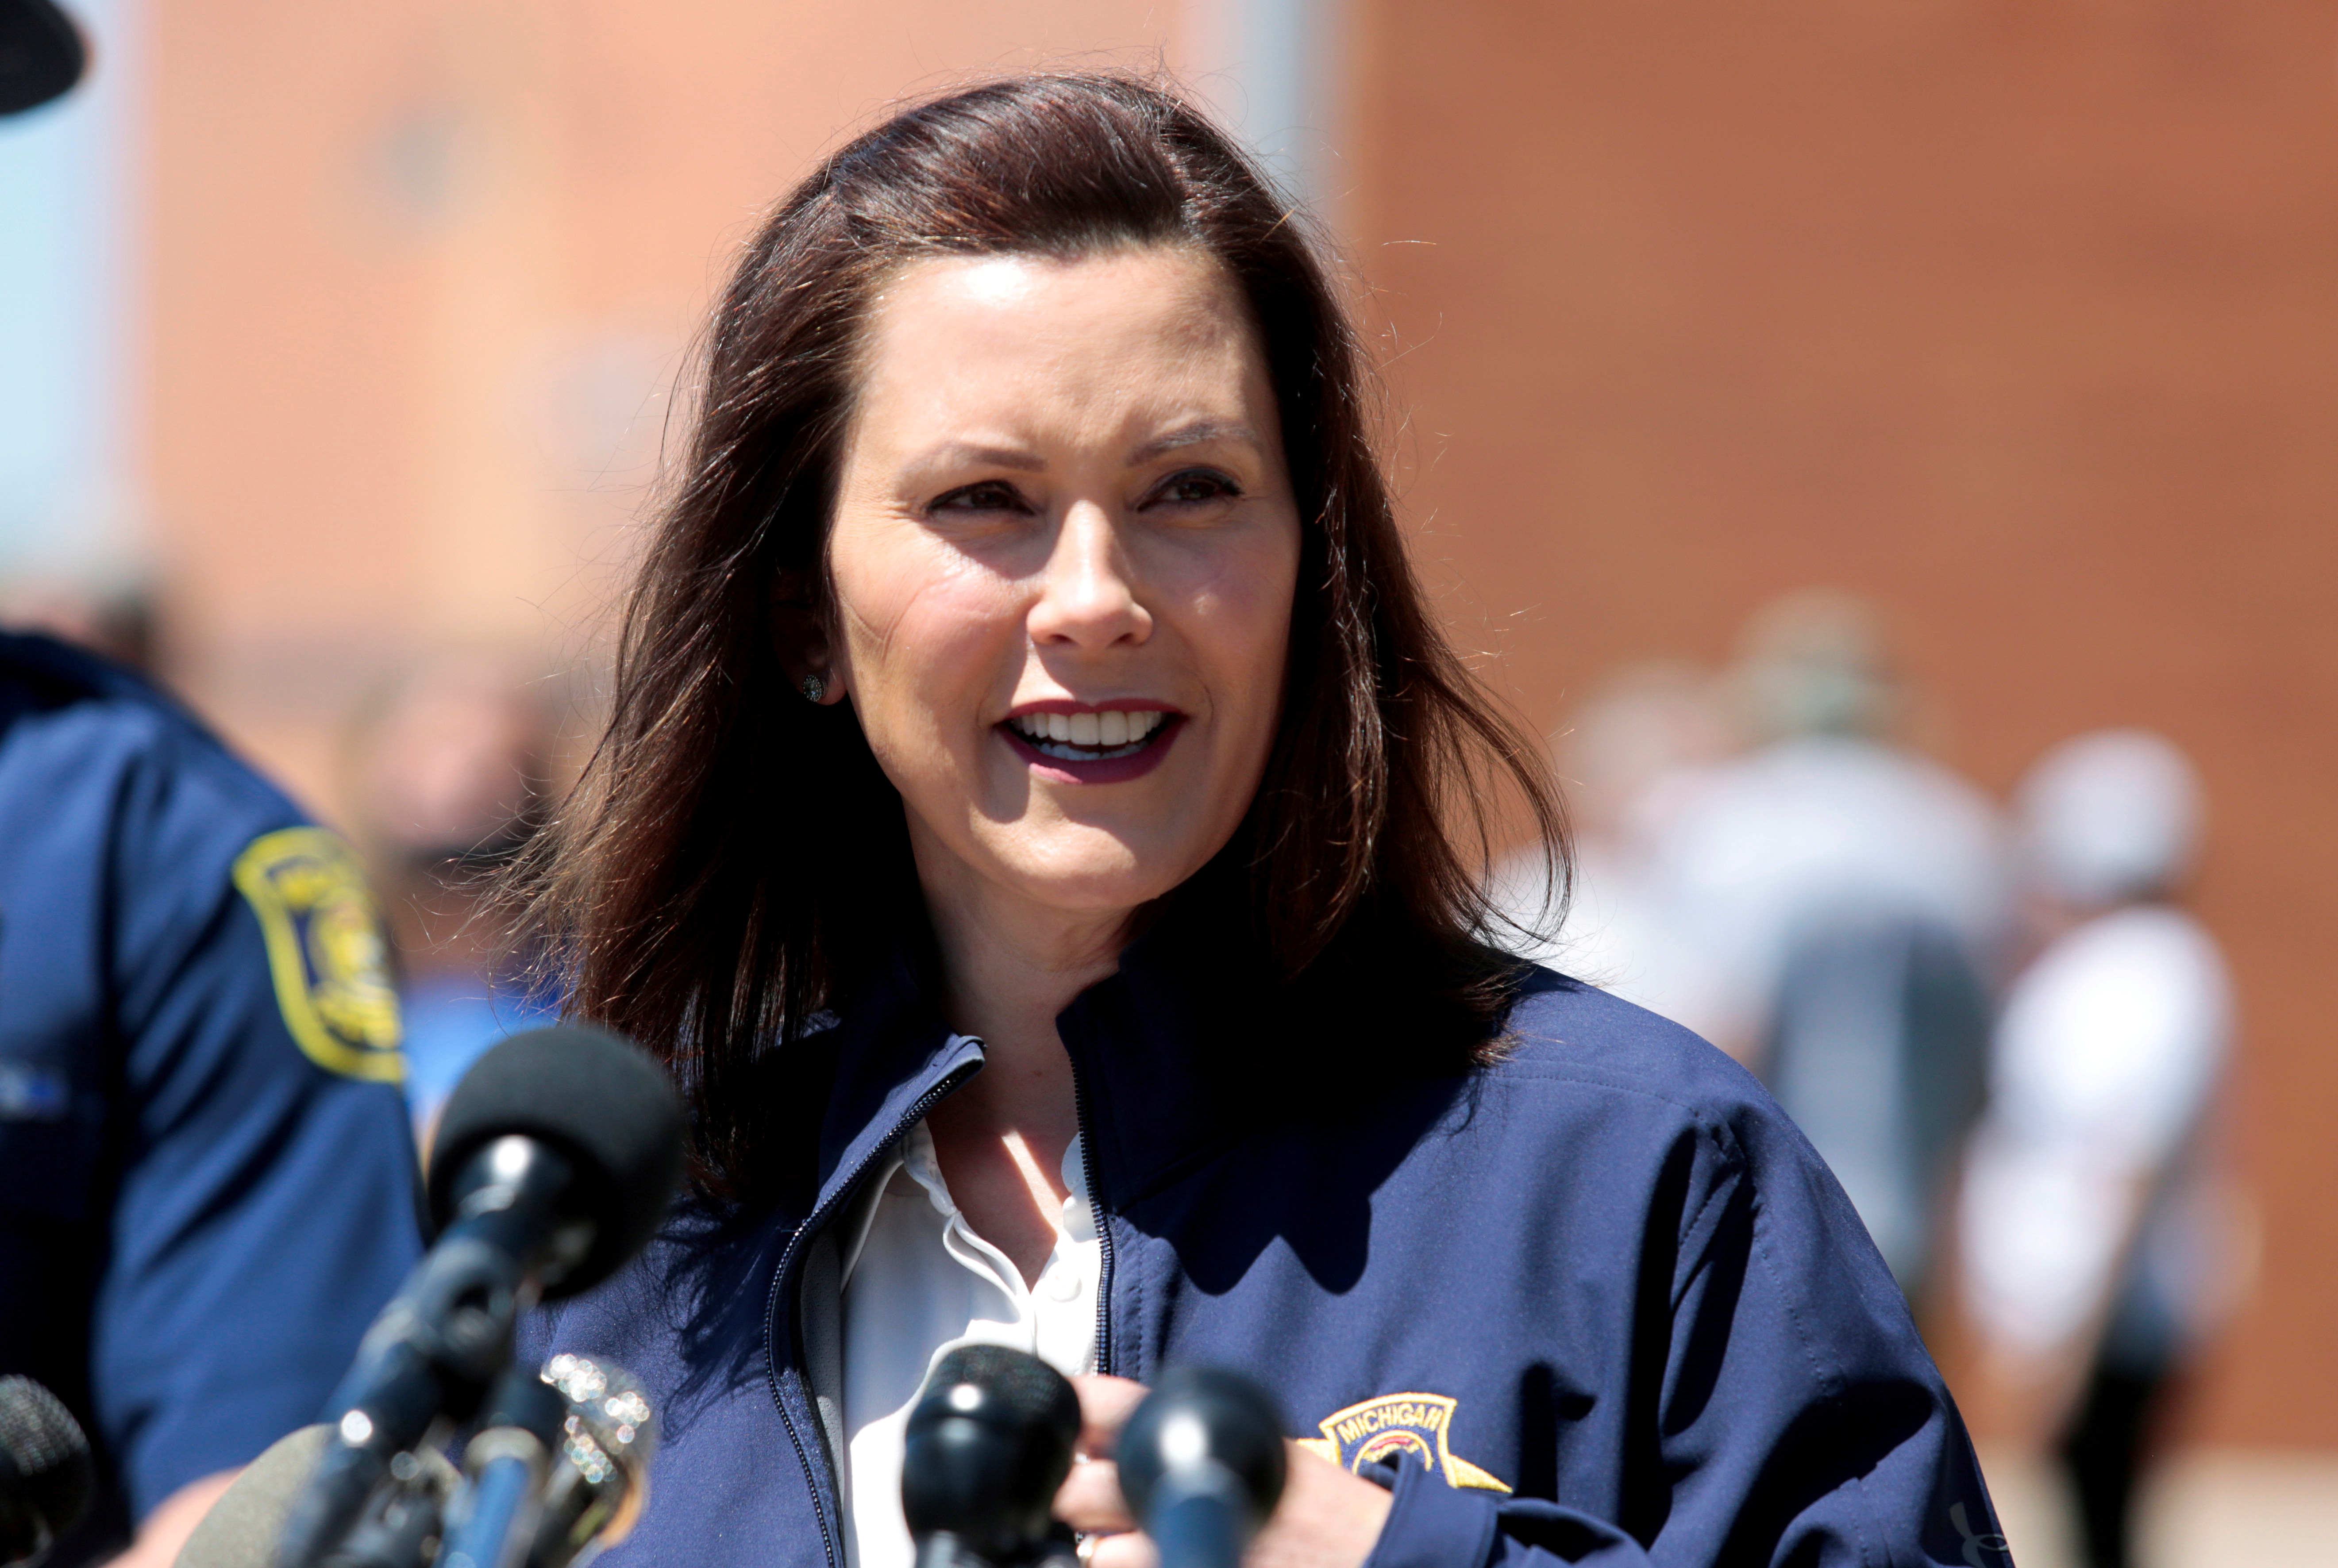 FILE PHOTO: Michigan Governor Gretchen Whitmer addresses the media about the flooding along the Tittabawassee River, after several dams breached, in downtown Midland, Michigan, U.S., May 20, 2020. REUTERS/Rebecca Cook